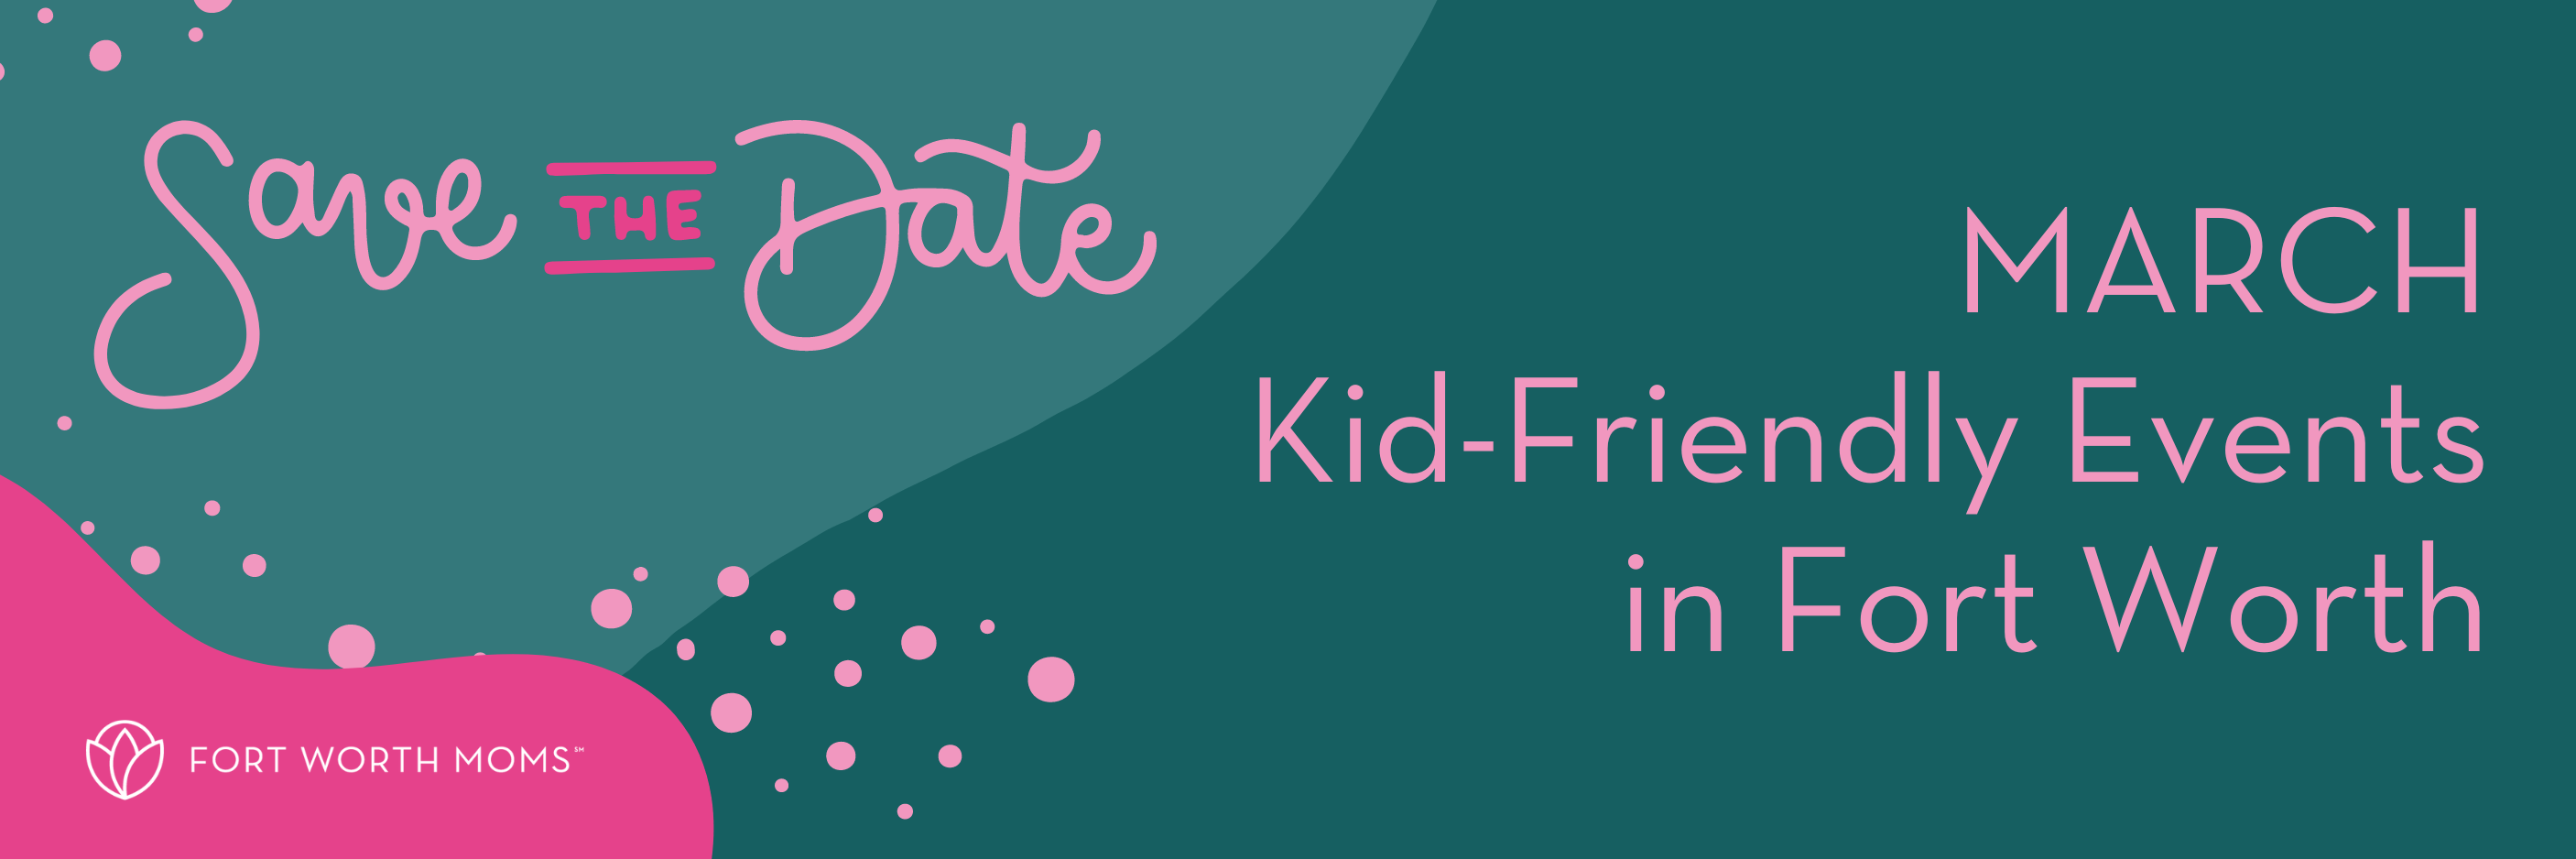 Save the Date :: March Kid-Friendly Events in Fort Worth